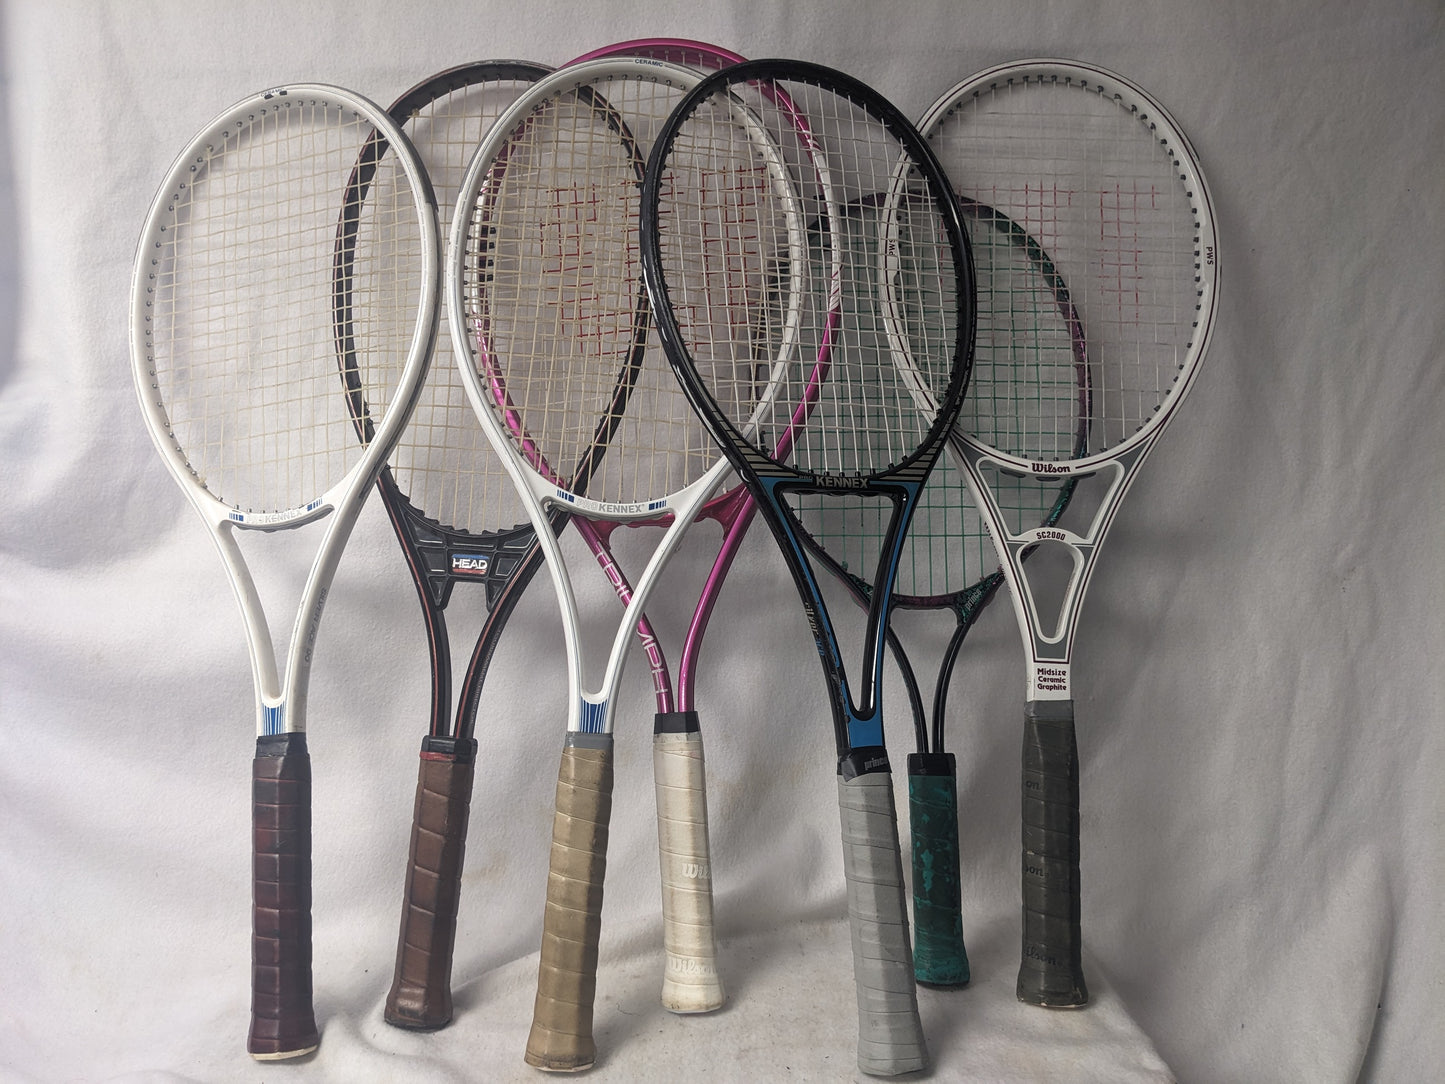 Tennis Racket, Assorted Sizes, Assorted Colors, Used.  One Piece.